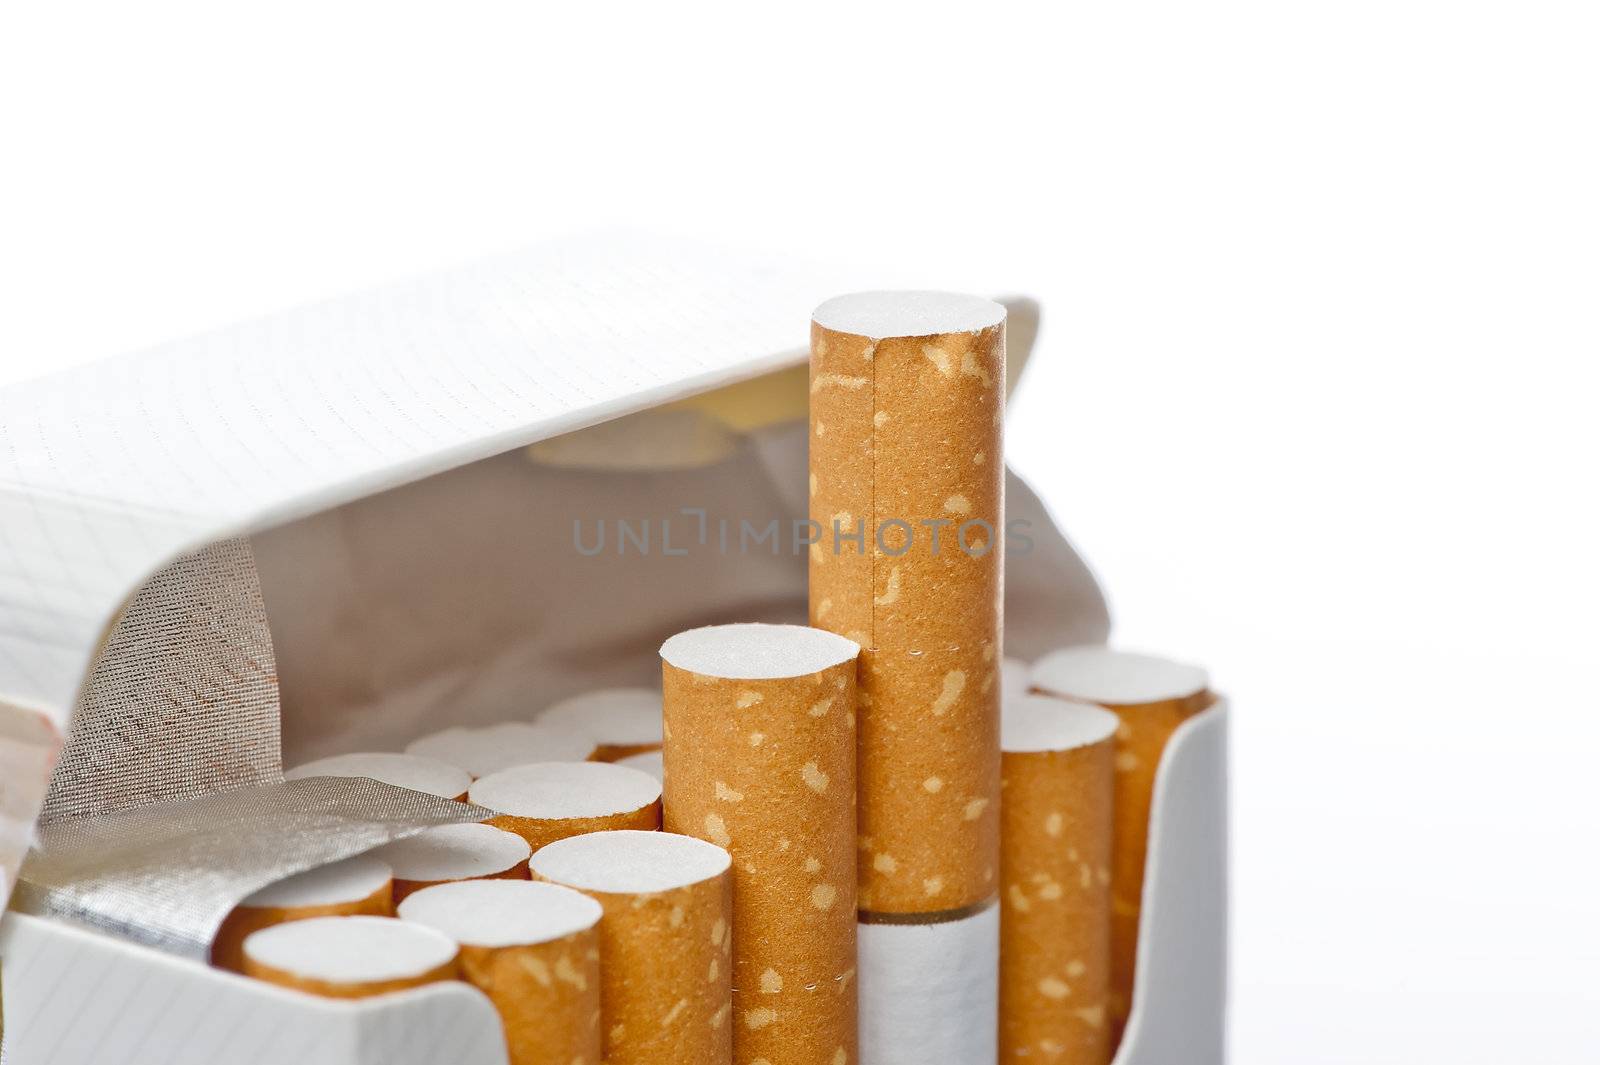 Open pack of cigarettes on a white background